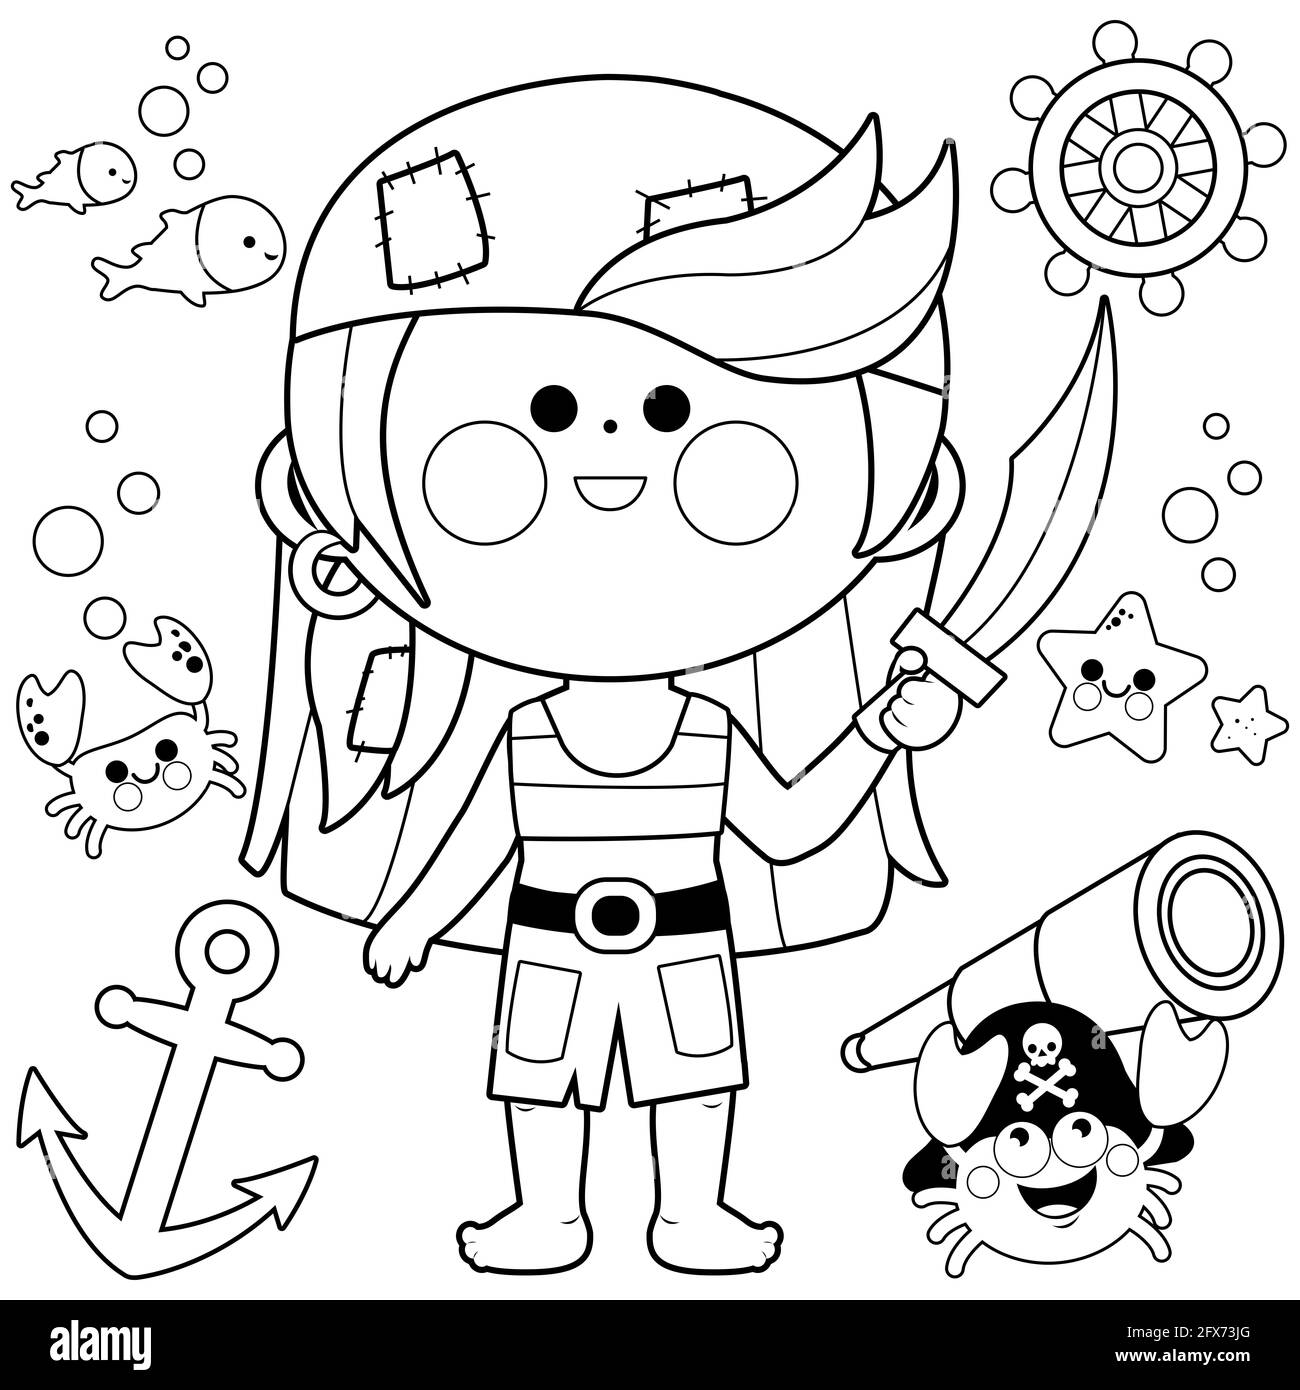 A pirate girl with a sword and other pirate themed illustrations. Black and white illustration. Stock Photo